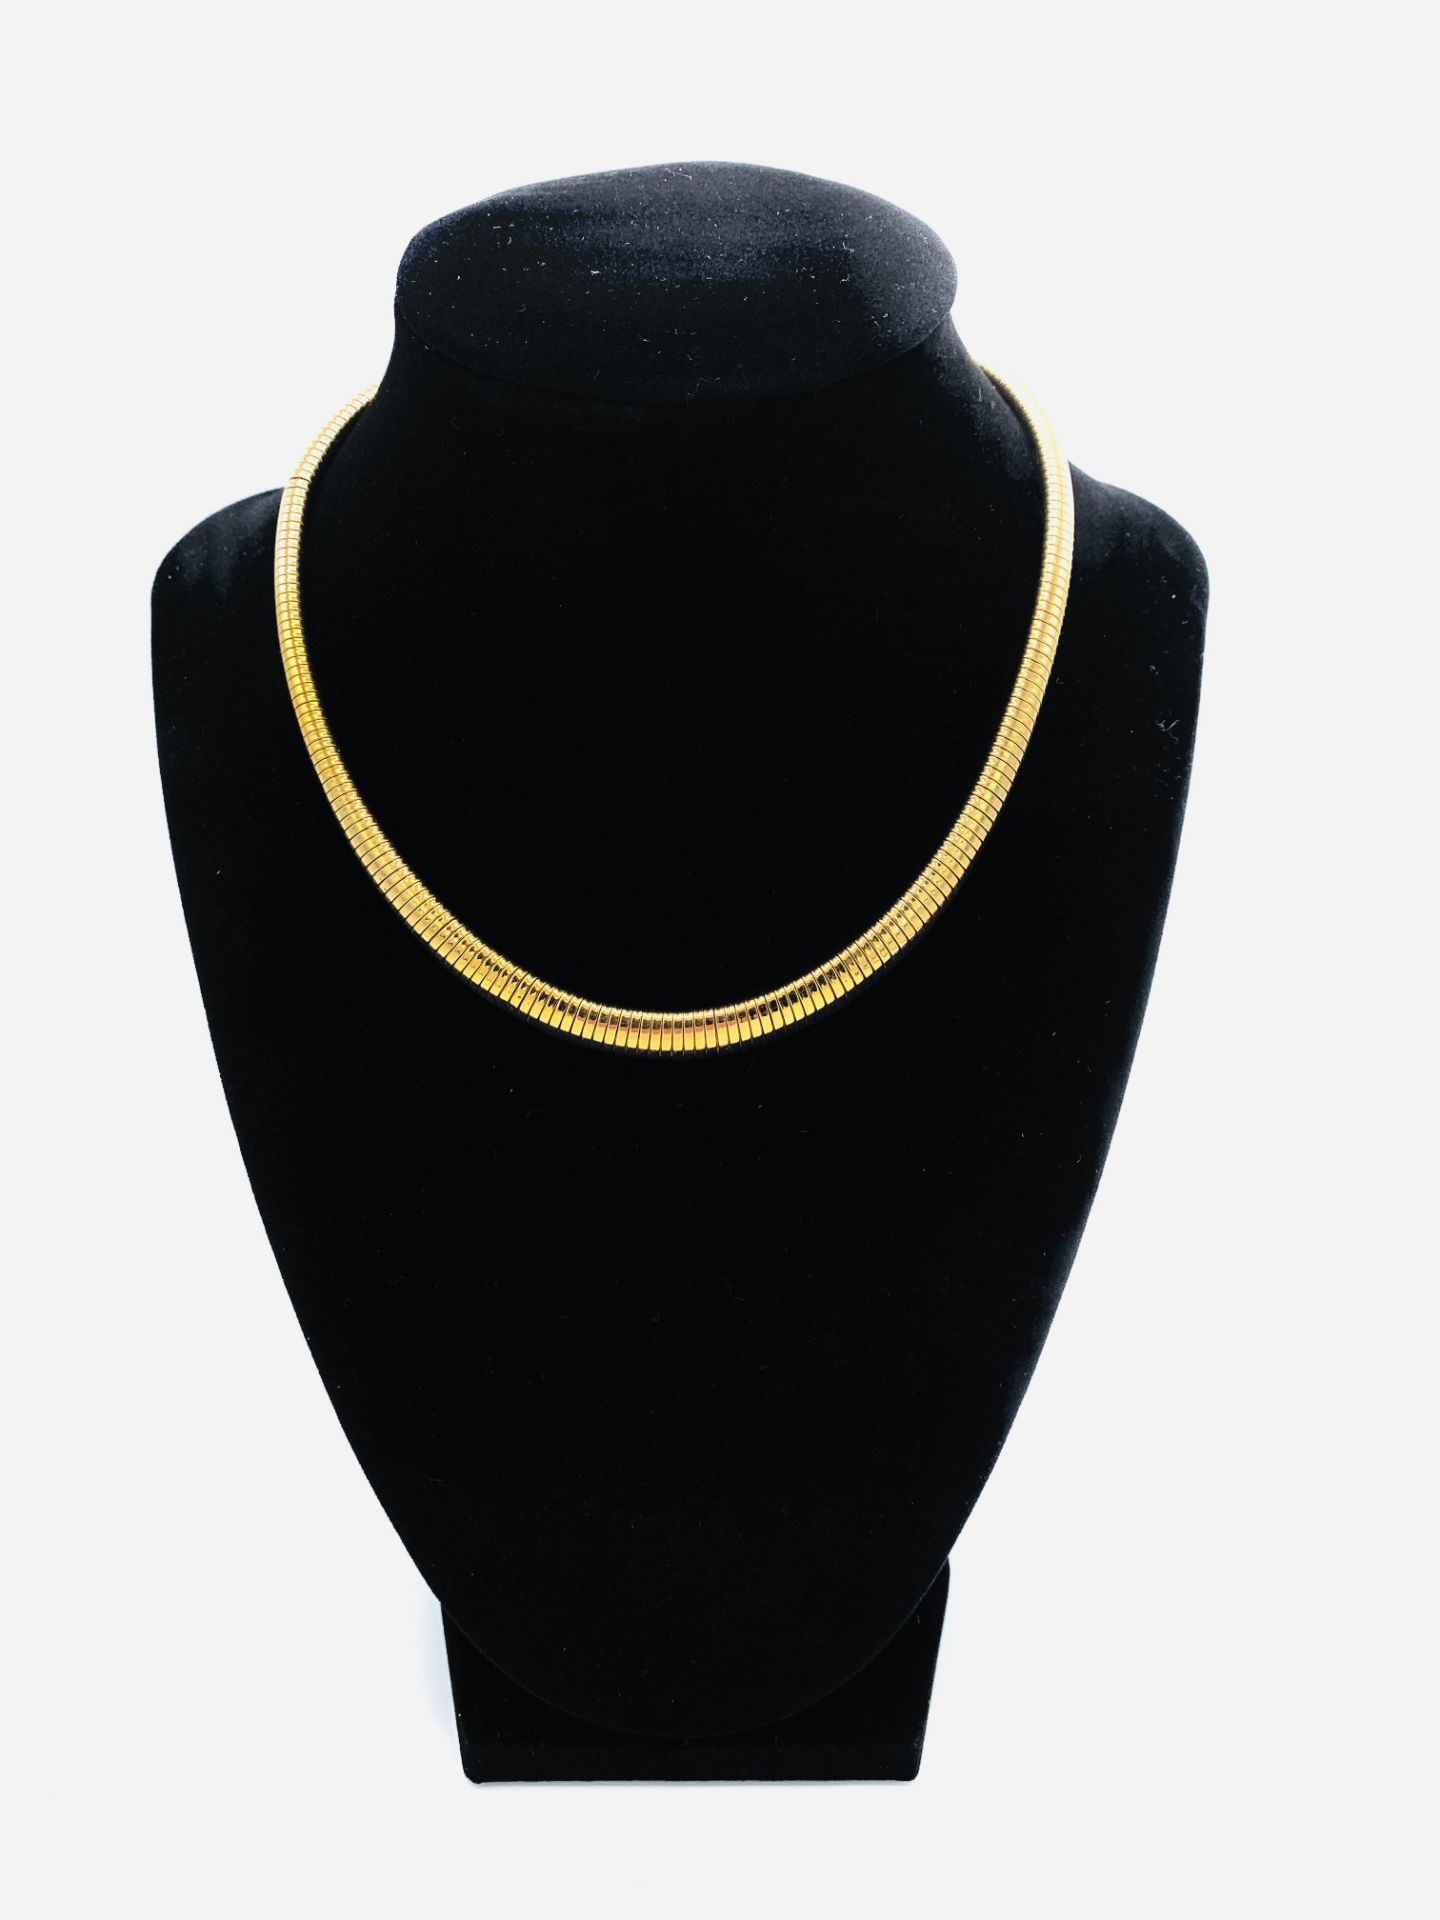 18ct gold turbogaz collar necklace. - Image 2 of 4